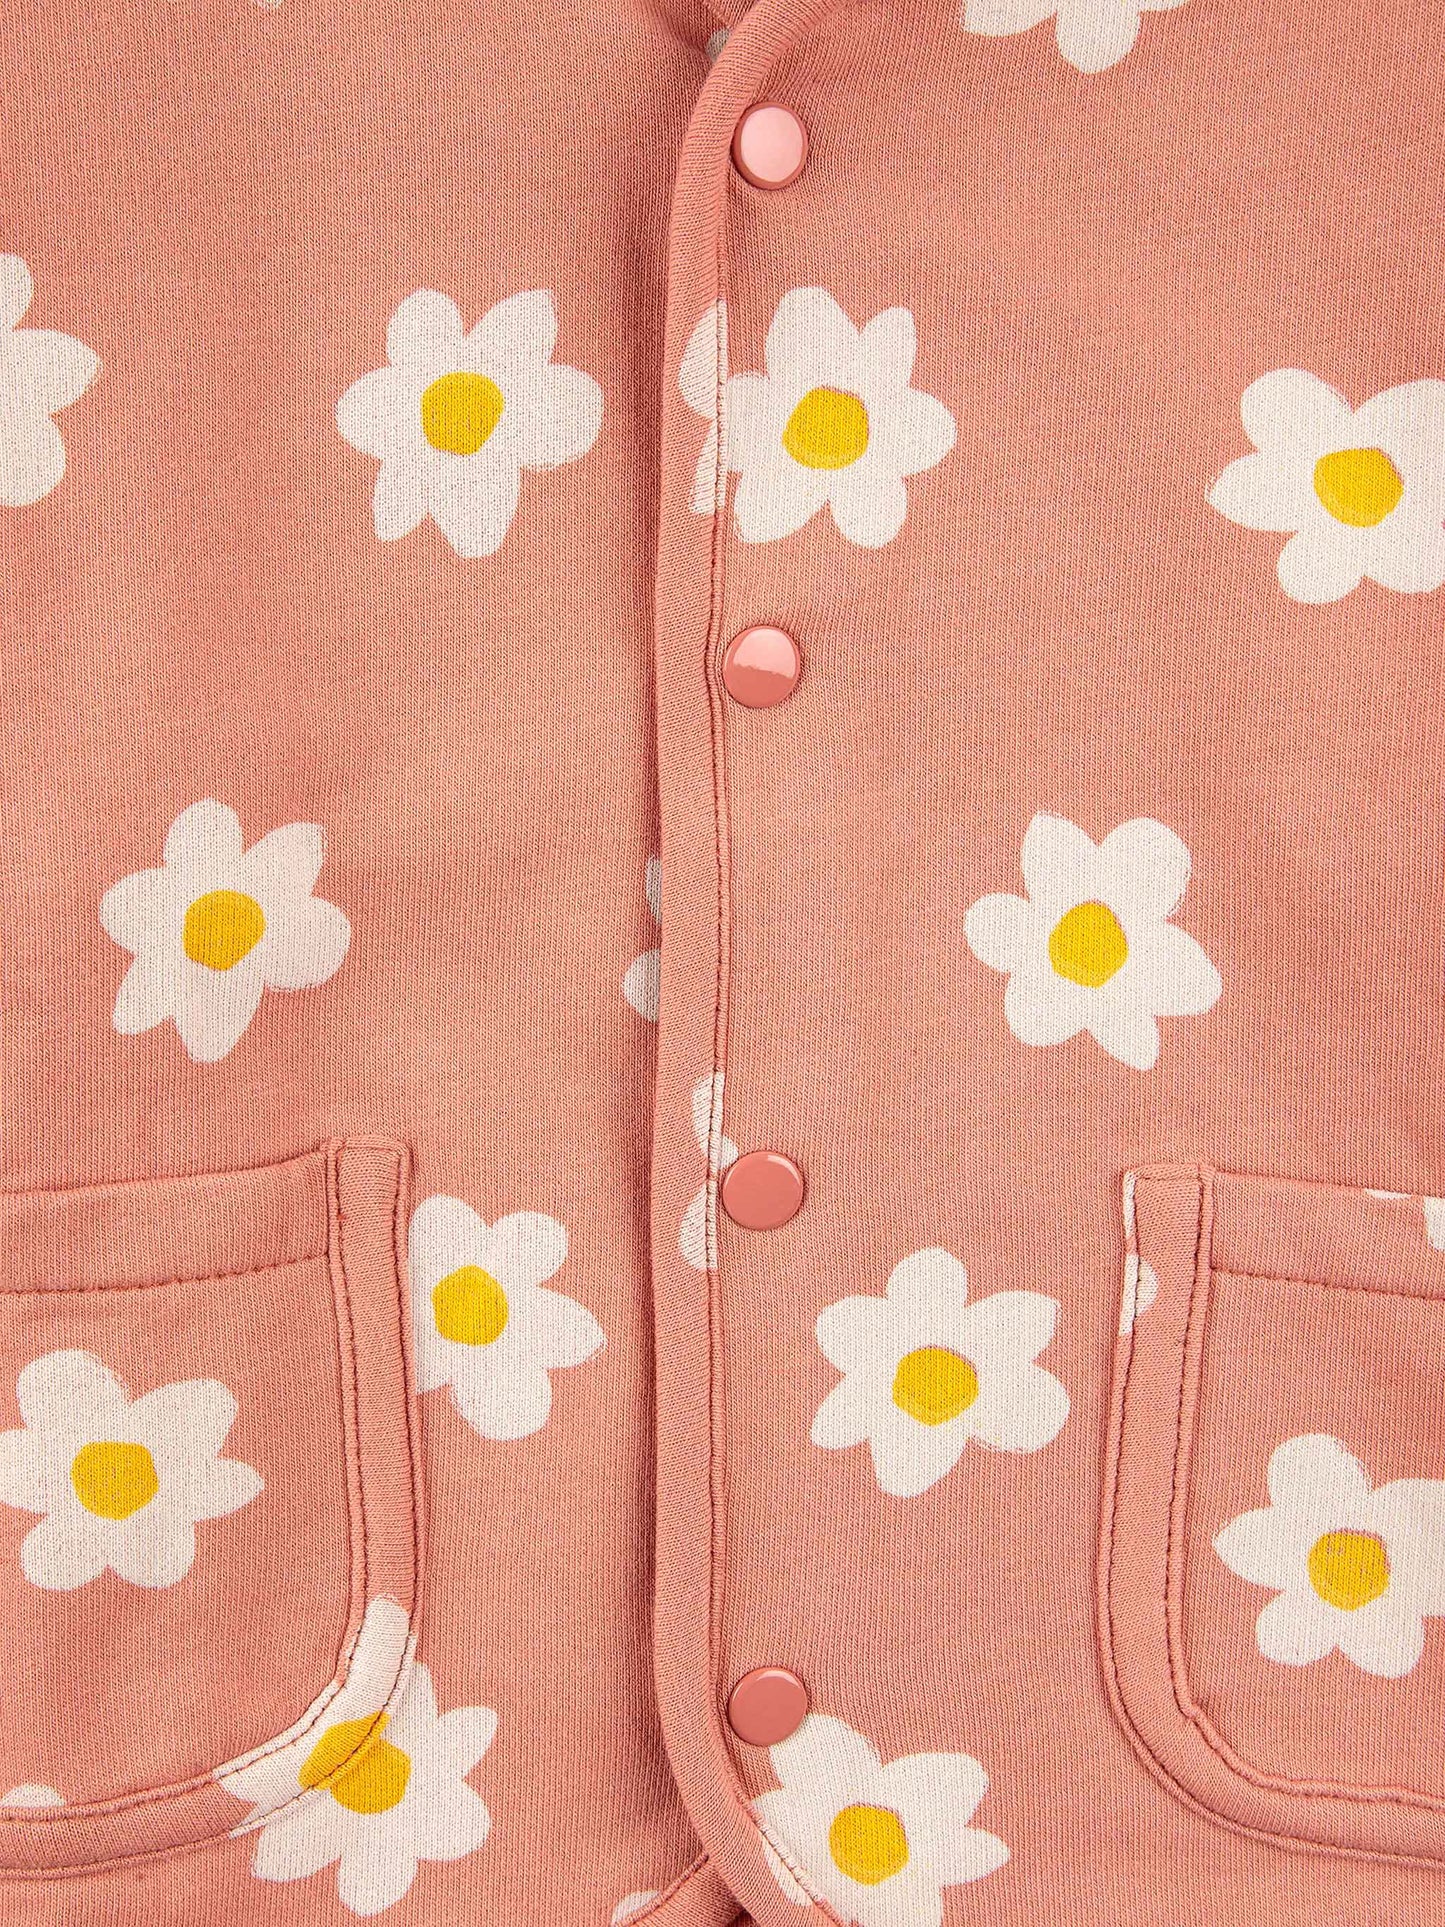 Bobo Choses Baby Little Flower Buttoned Sweatshirt - 95% organic cotton 5% elastane salmon pink with a floral print. Designed as a button down with front pockets. It has a loose fit.  Made ethically and sustainably in Portugal for Bobo Choses.